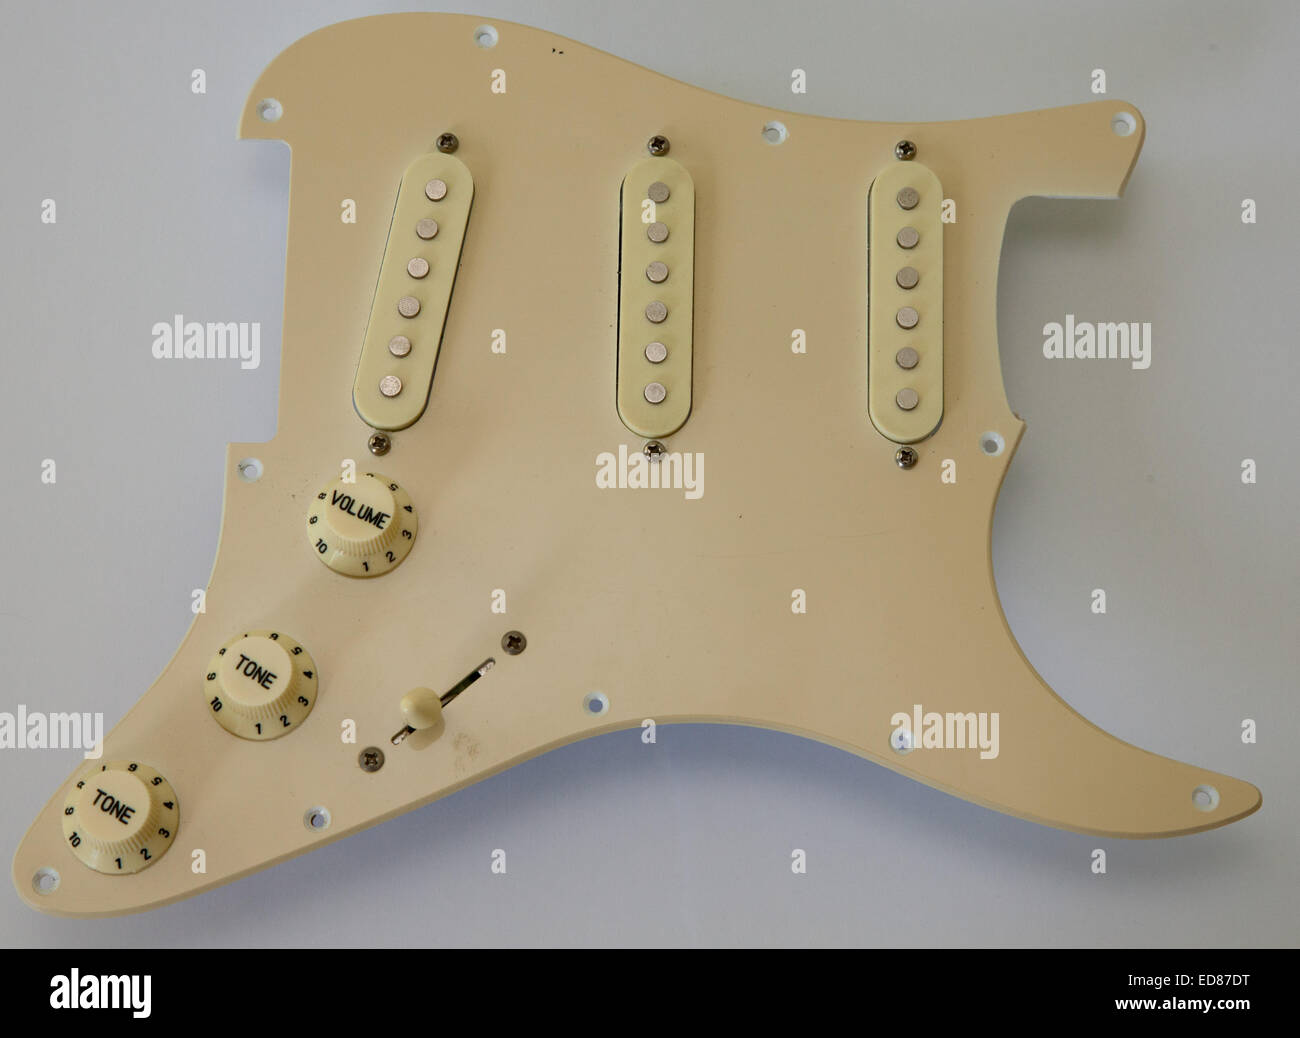 Guitar pickguard left handed, loaded with pickups, volume and tonme controls, and selector switch, stratocaster style guitar Stock Photo